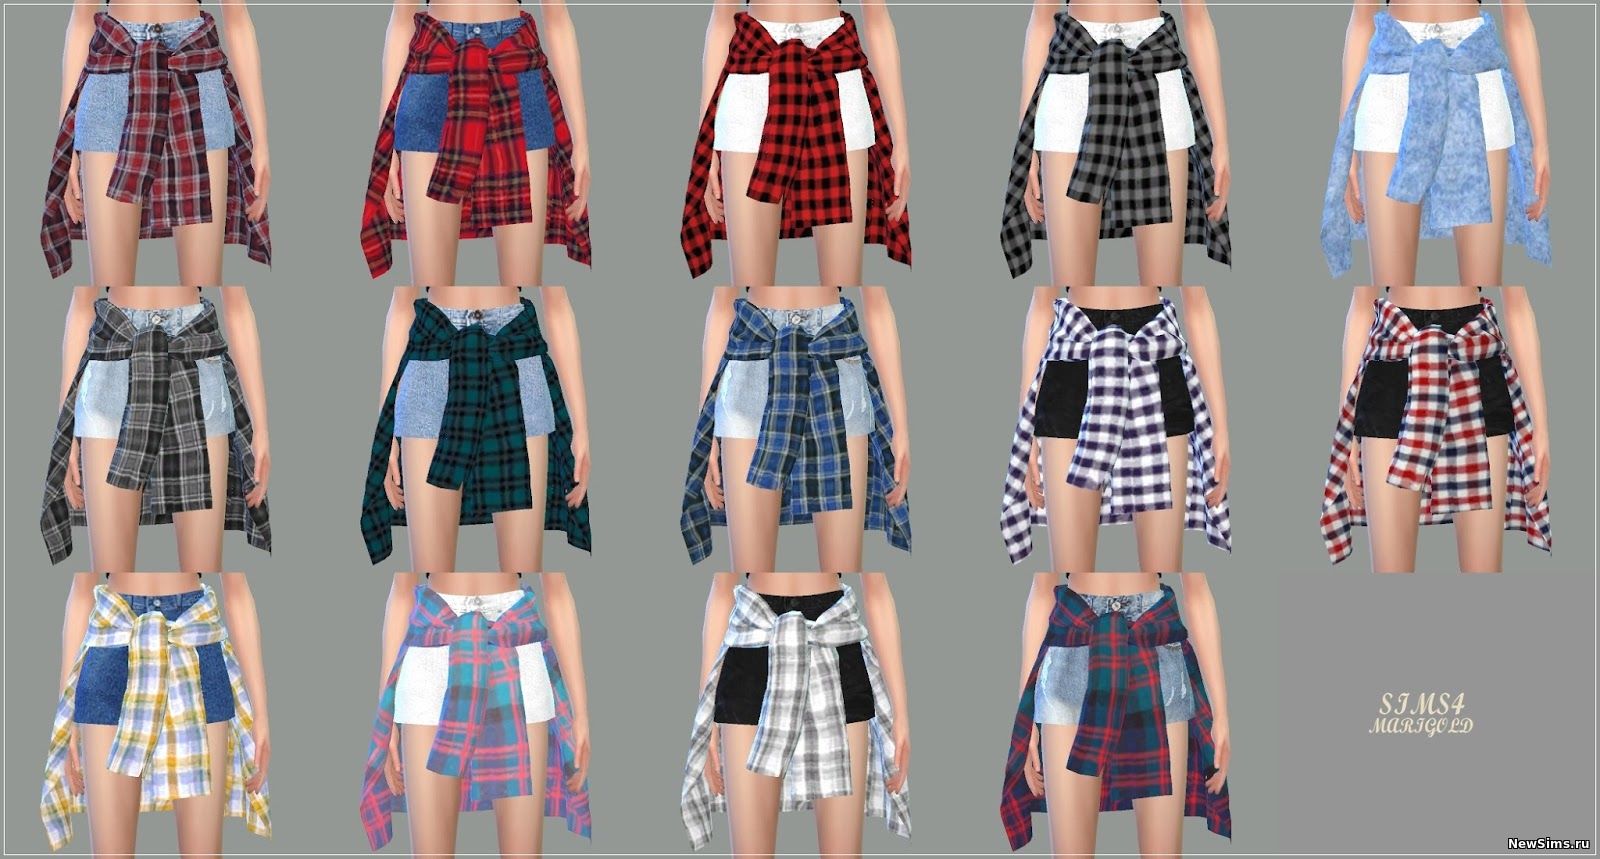 http://newsims.ru/000000000000007/Hot_Pants_With_Shirts_by_Marigold.jpg